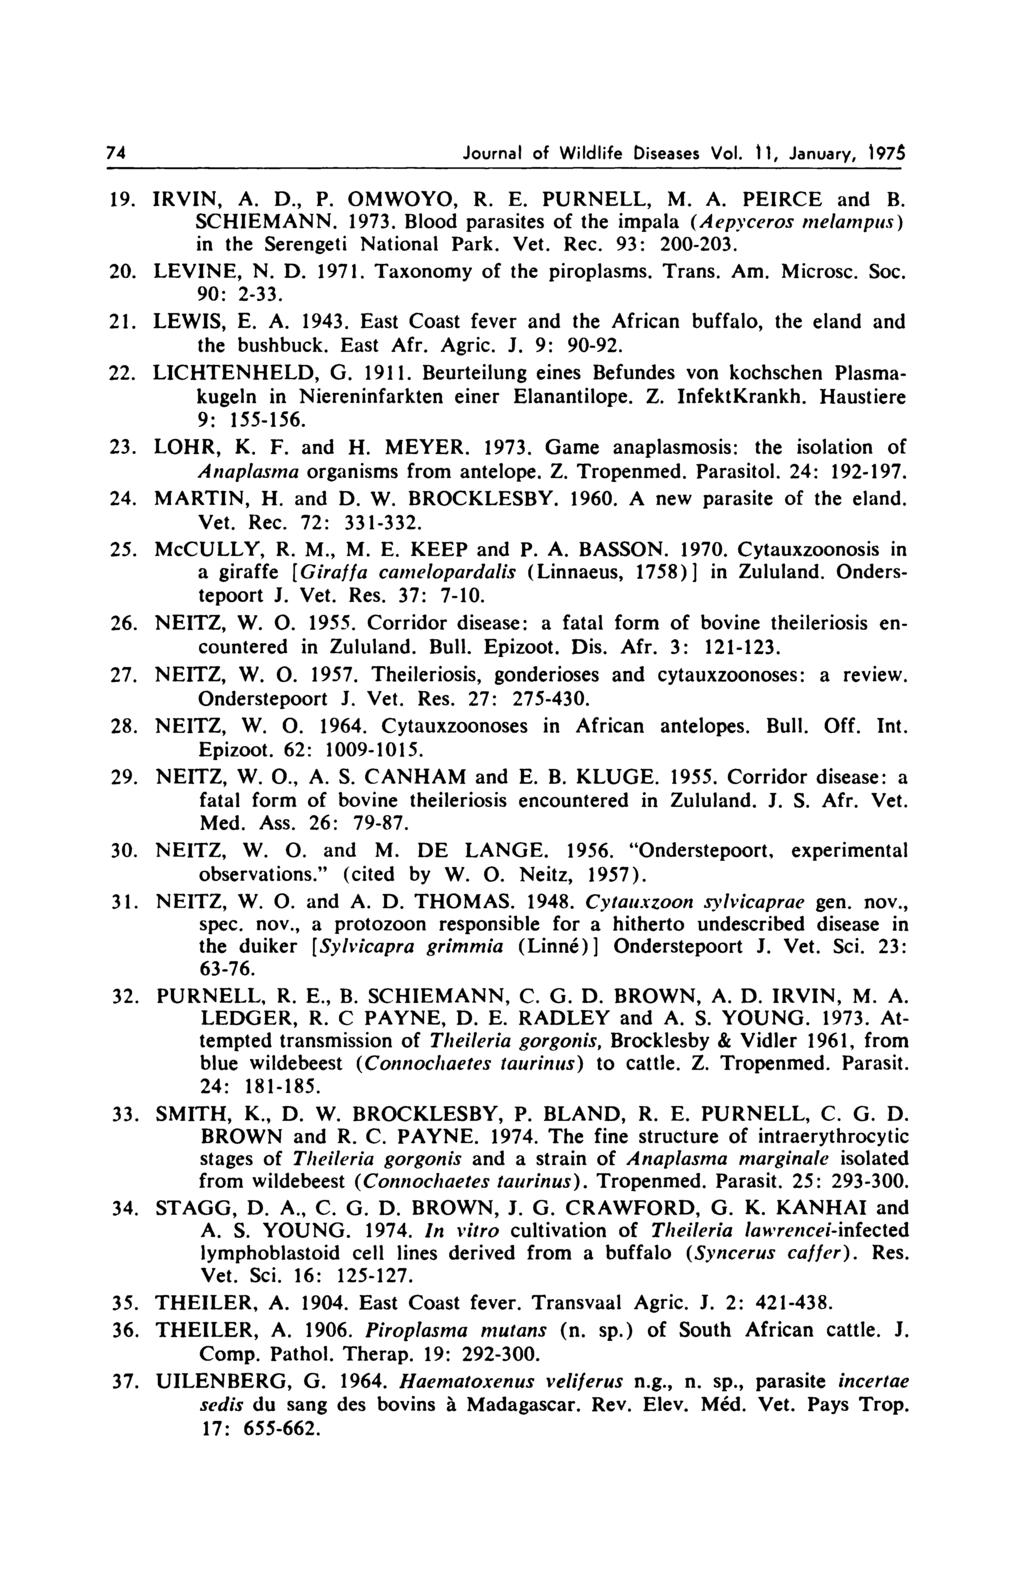 74 Journal of Wildlife Diseases Vol. 11, January, 197 19. IRVIN, A. D., P. OMWOYO, R. E. PURNELL, M. A. PEIRCE and B. SCHIEMANN. 1973.